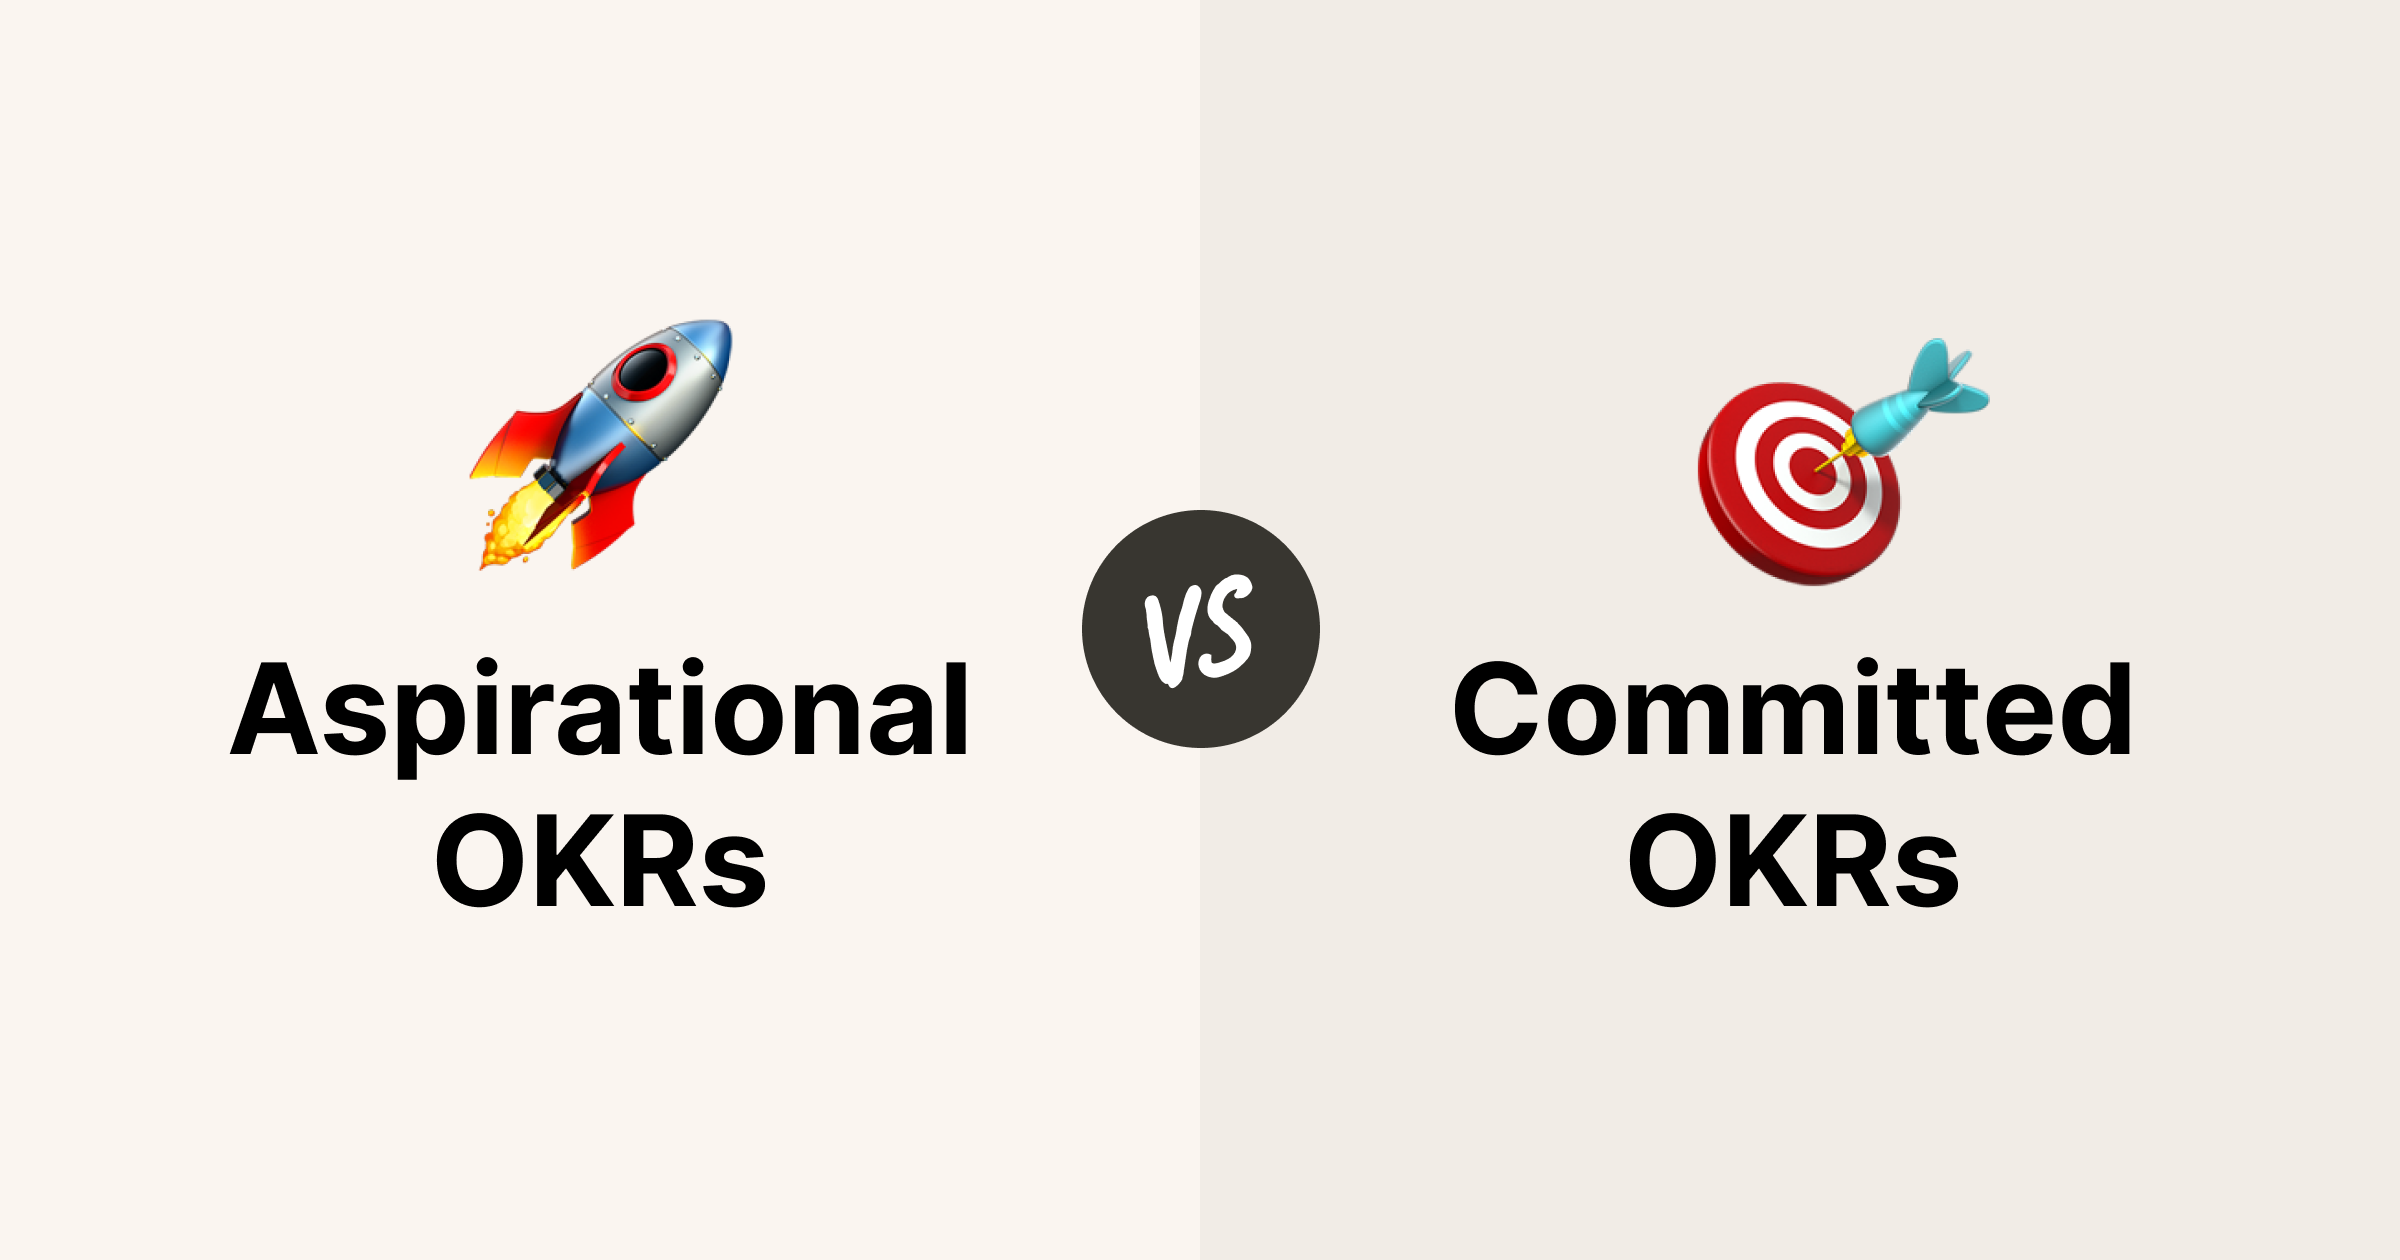 Committed vs Aspirational OKRs